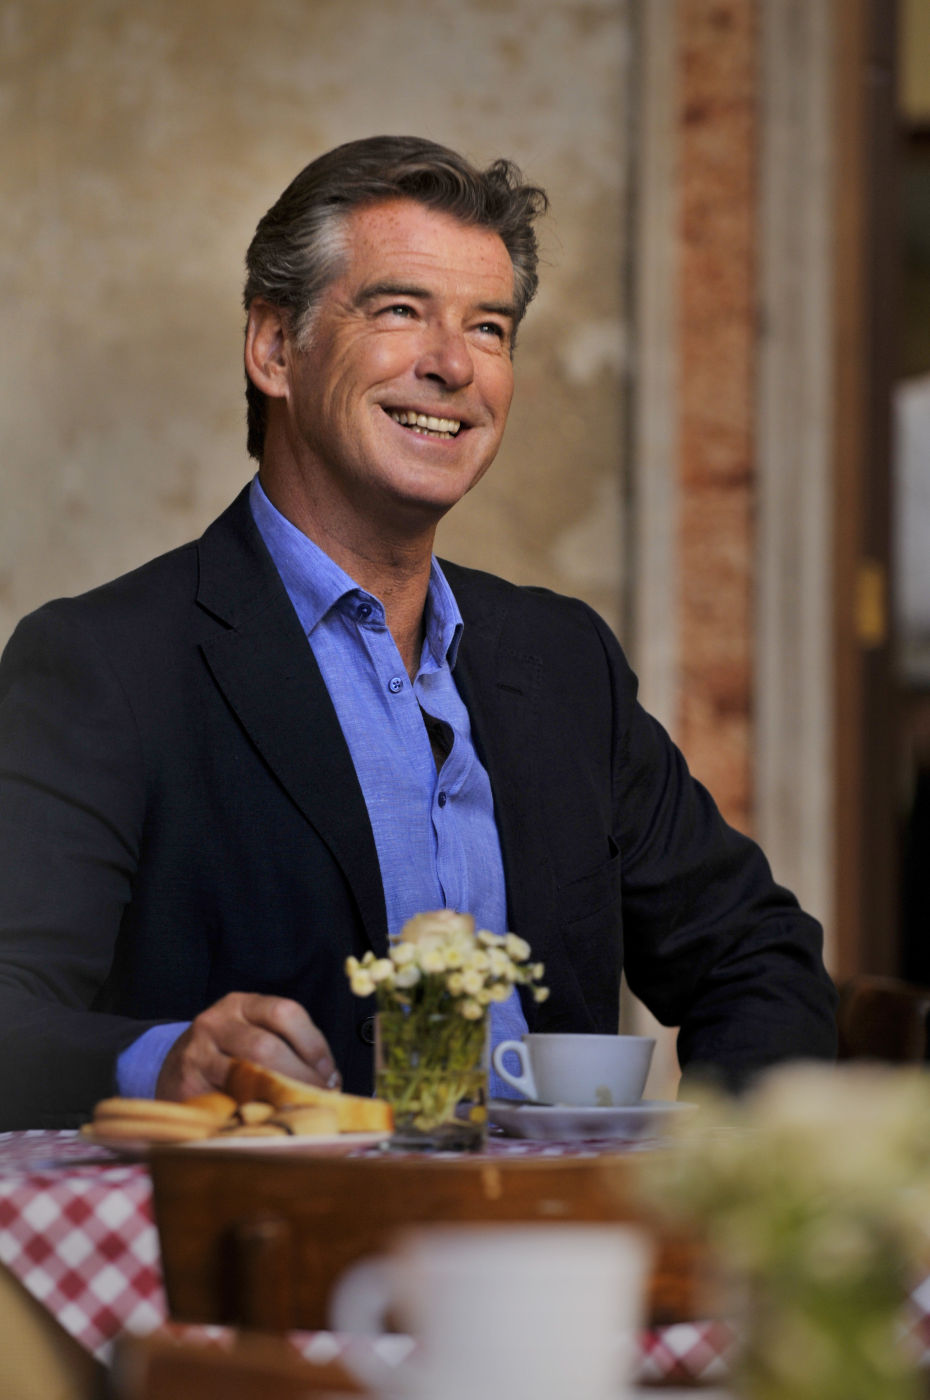 Paprika Steen and Pierce Brosnan stars as Philip in Sony Pictures Classics' Love Is All You Need (2013)